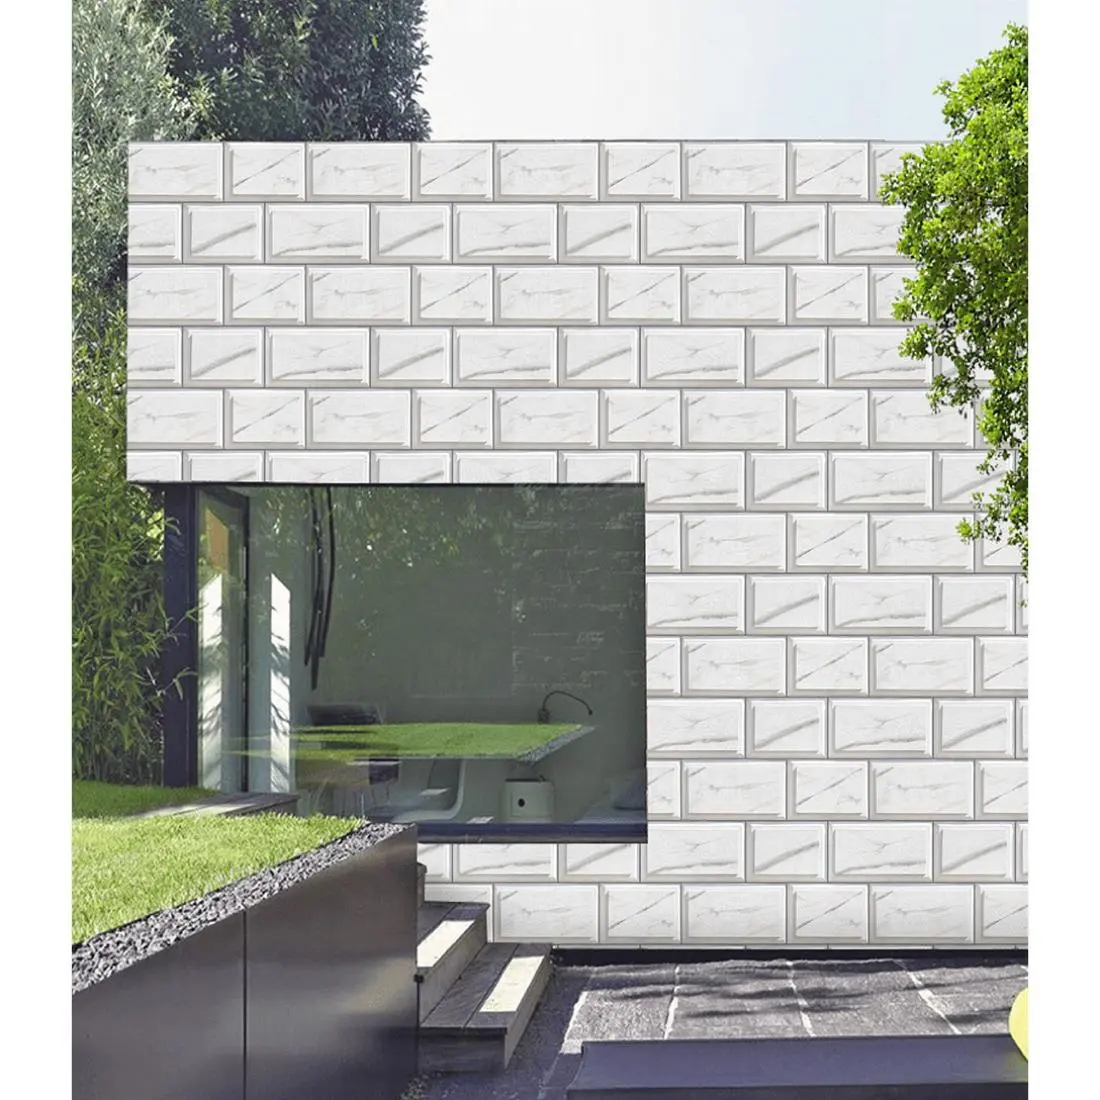 Vistaar Brand Best Quality White Bricks New Design Elevation Tiles For Outdoor Use Ceramic Wall Tiles 12x18 (300x450 / 30x45)